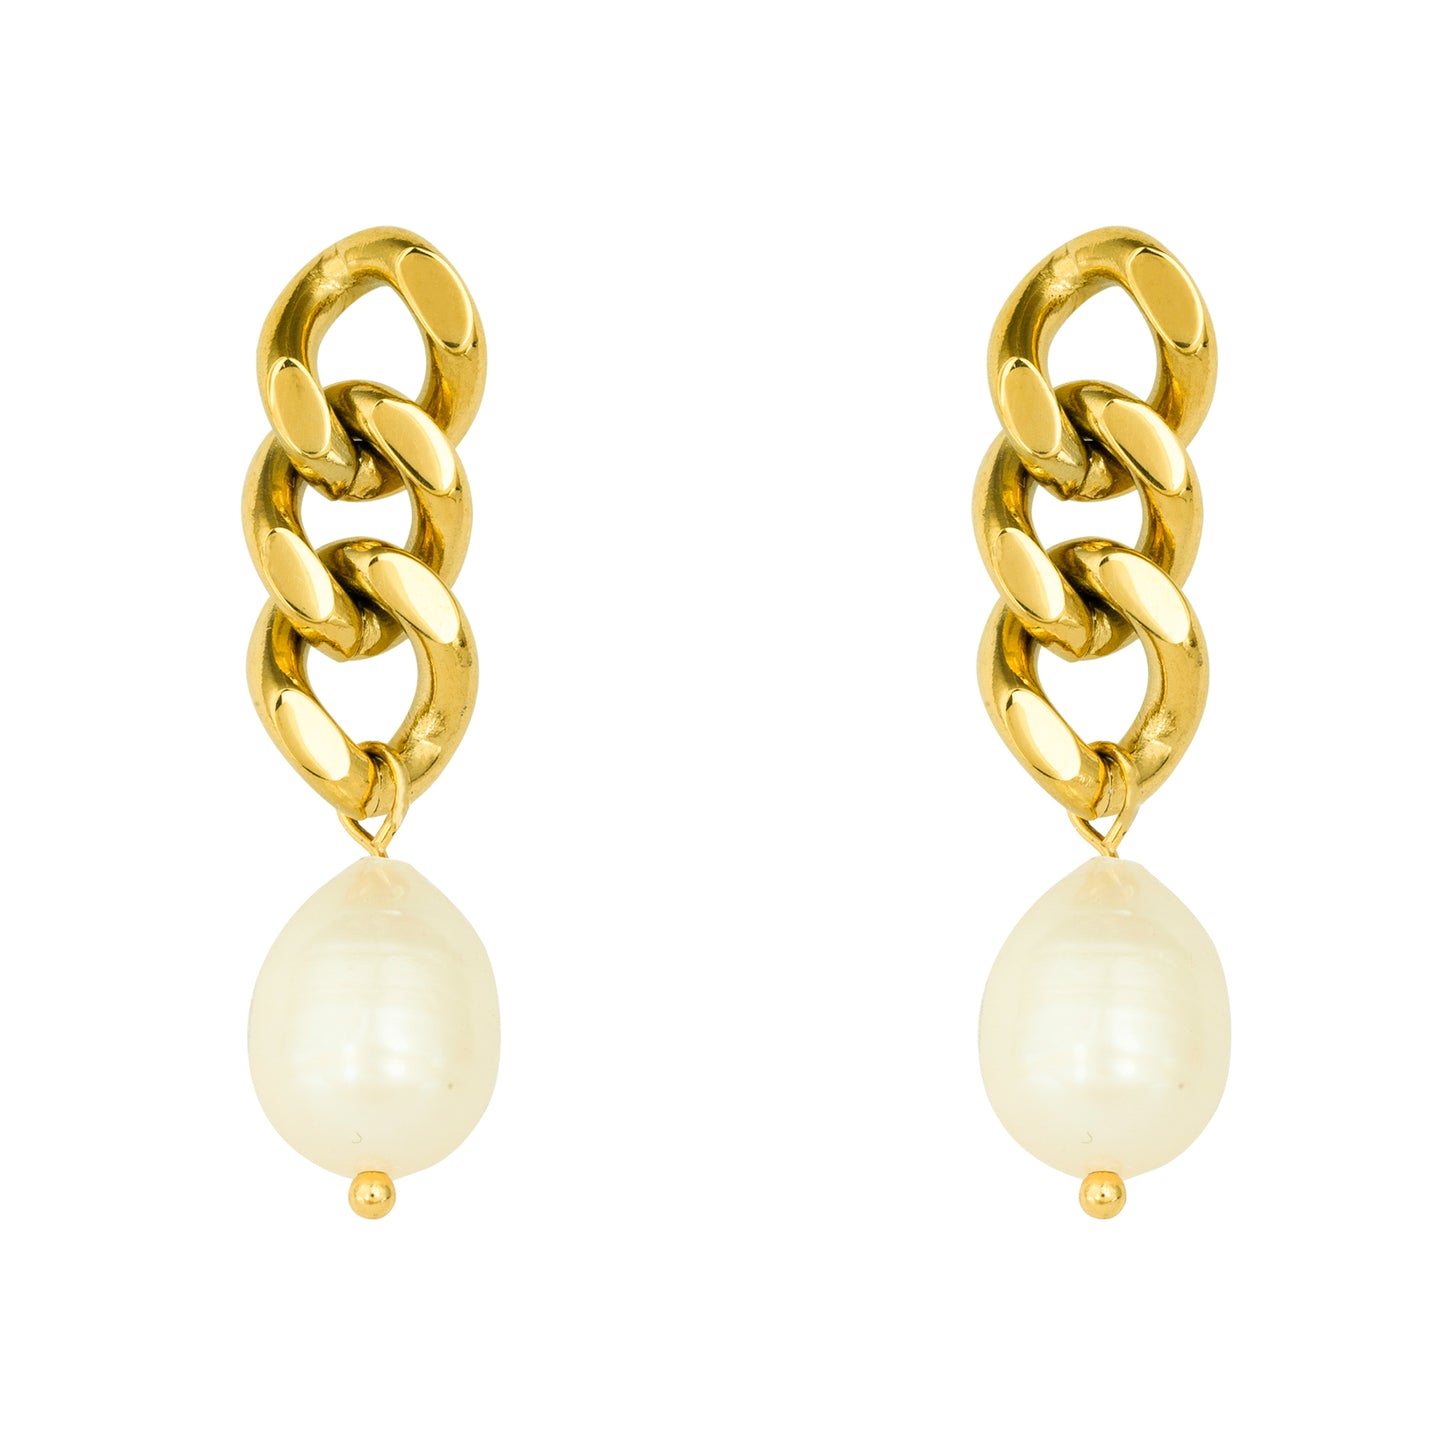 Cuban Chain Earrings with Pearls